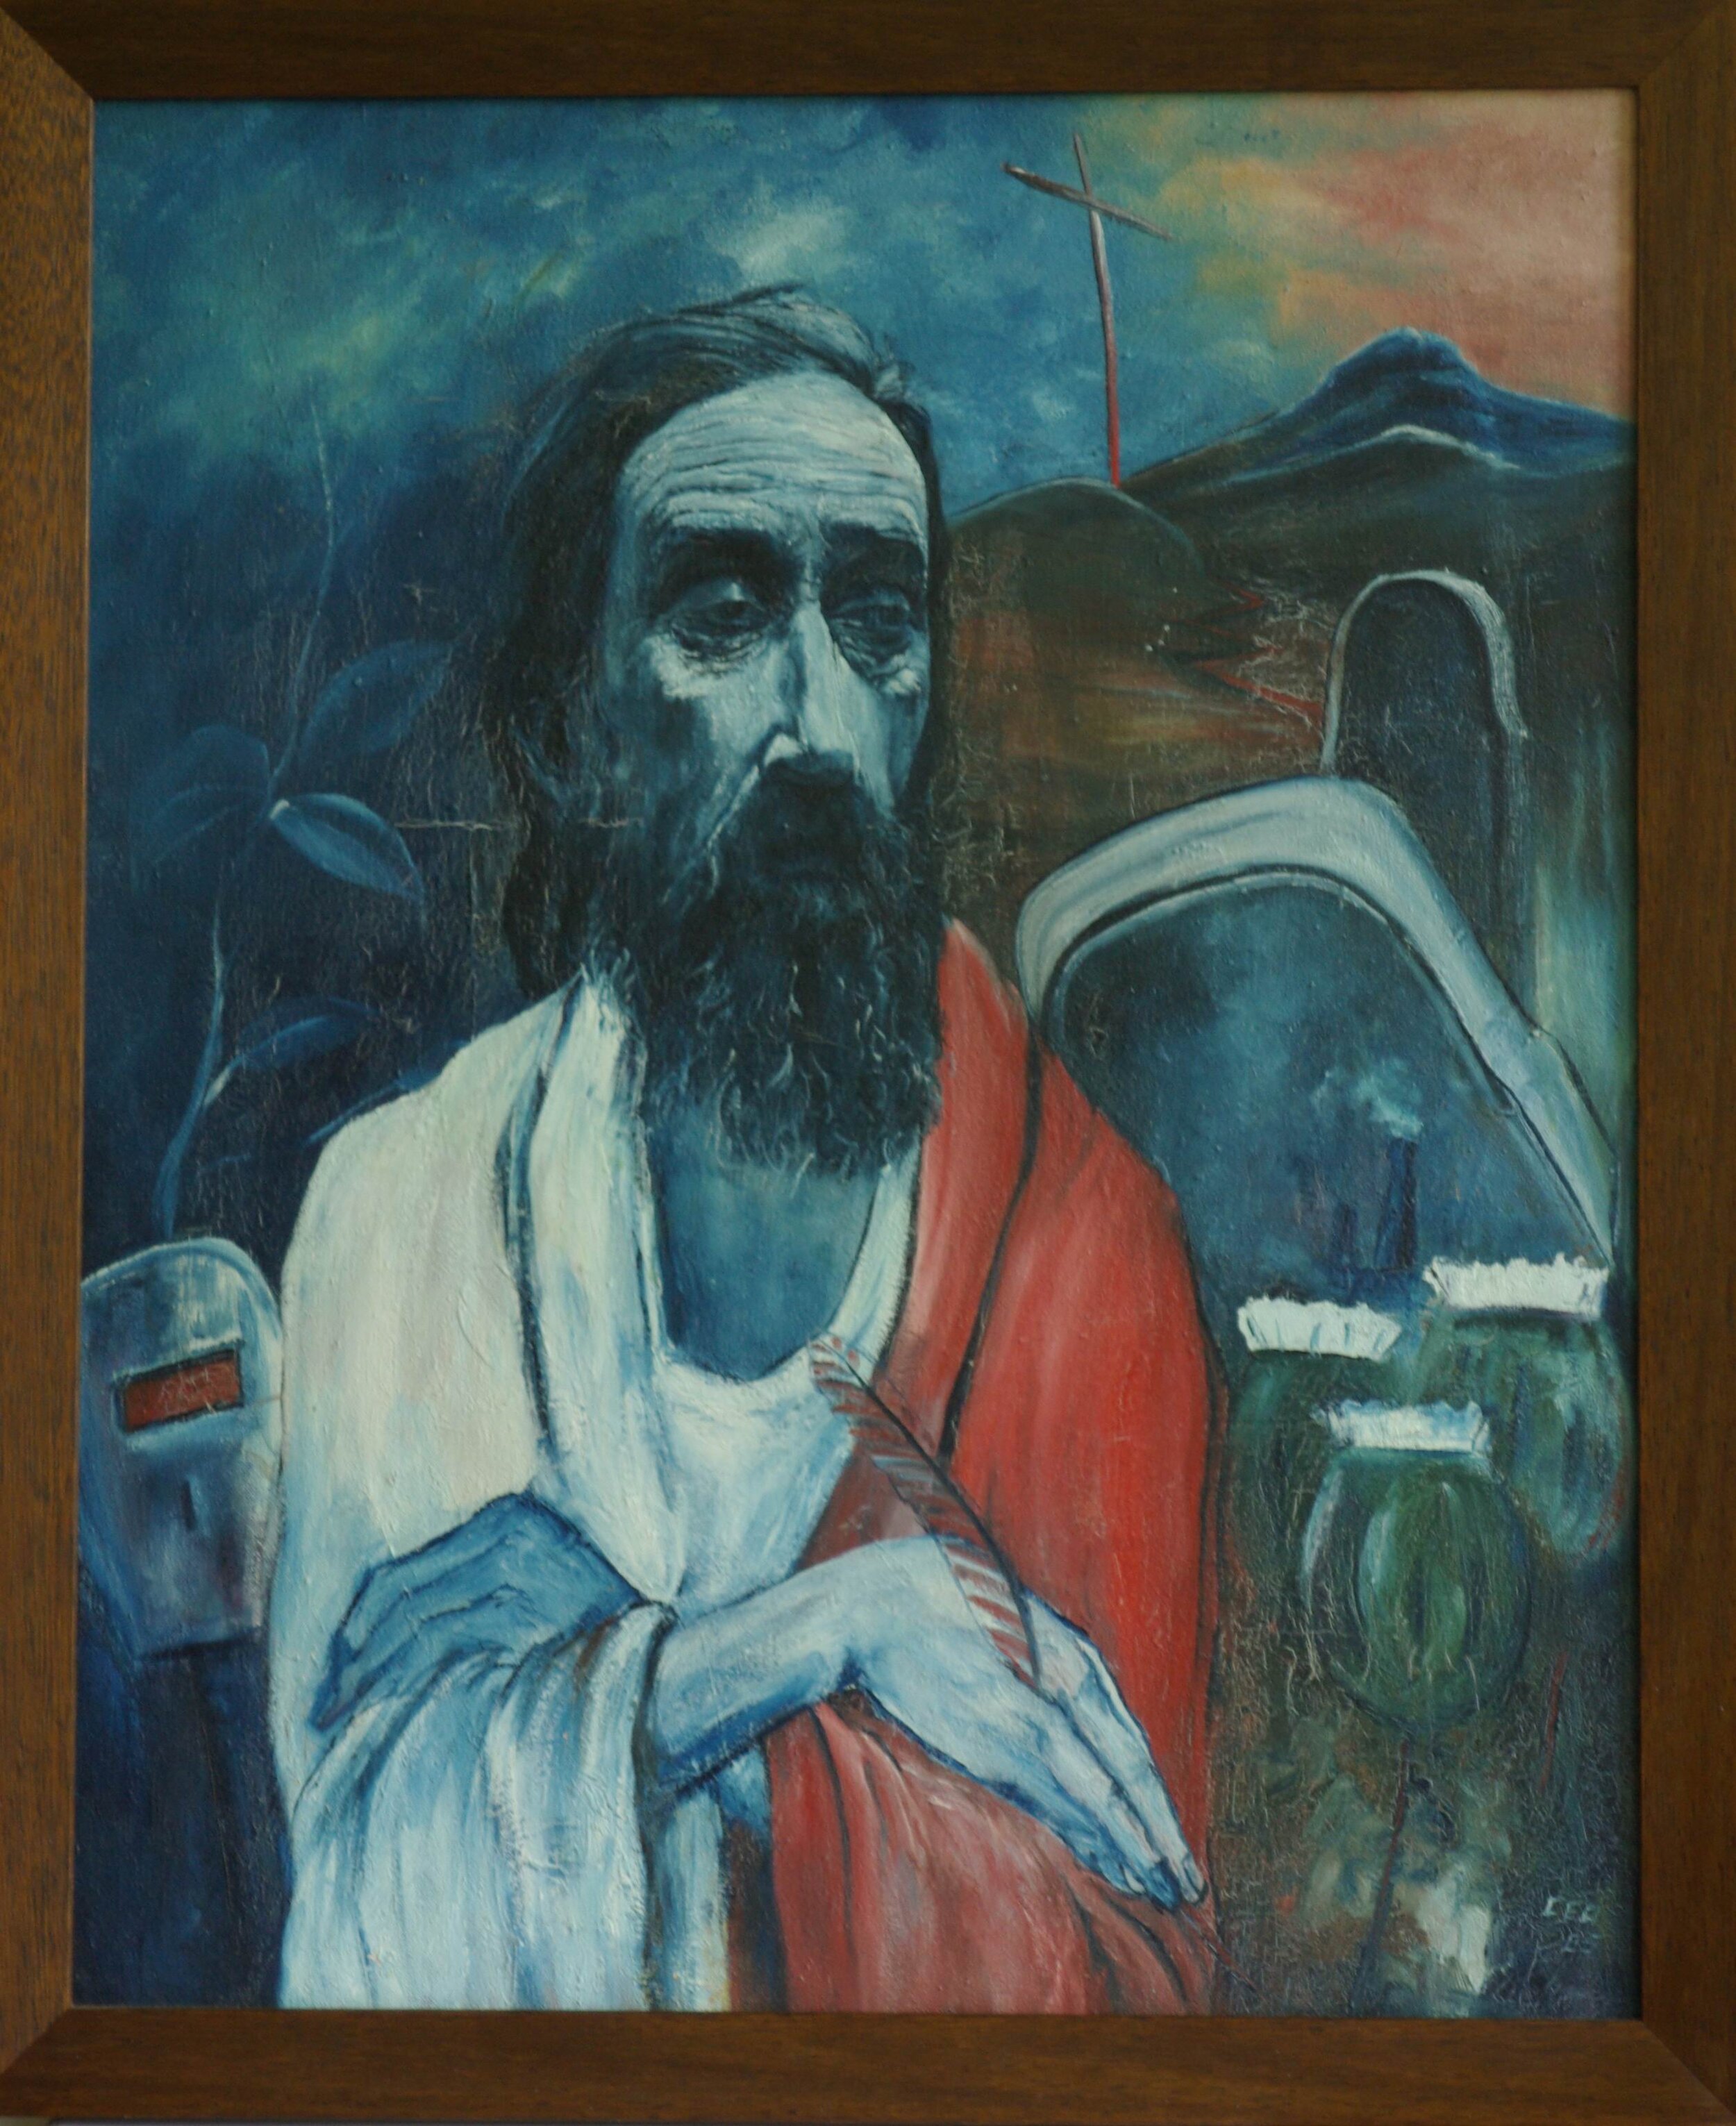  Carl Edward Otto,  James K. Baxter  ,1985, Oil on canvas, New Zealand Portrait Gallery Collection 